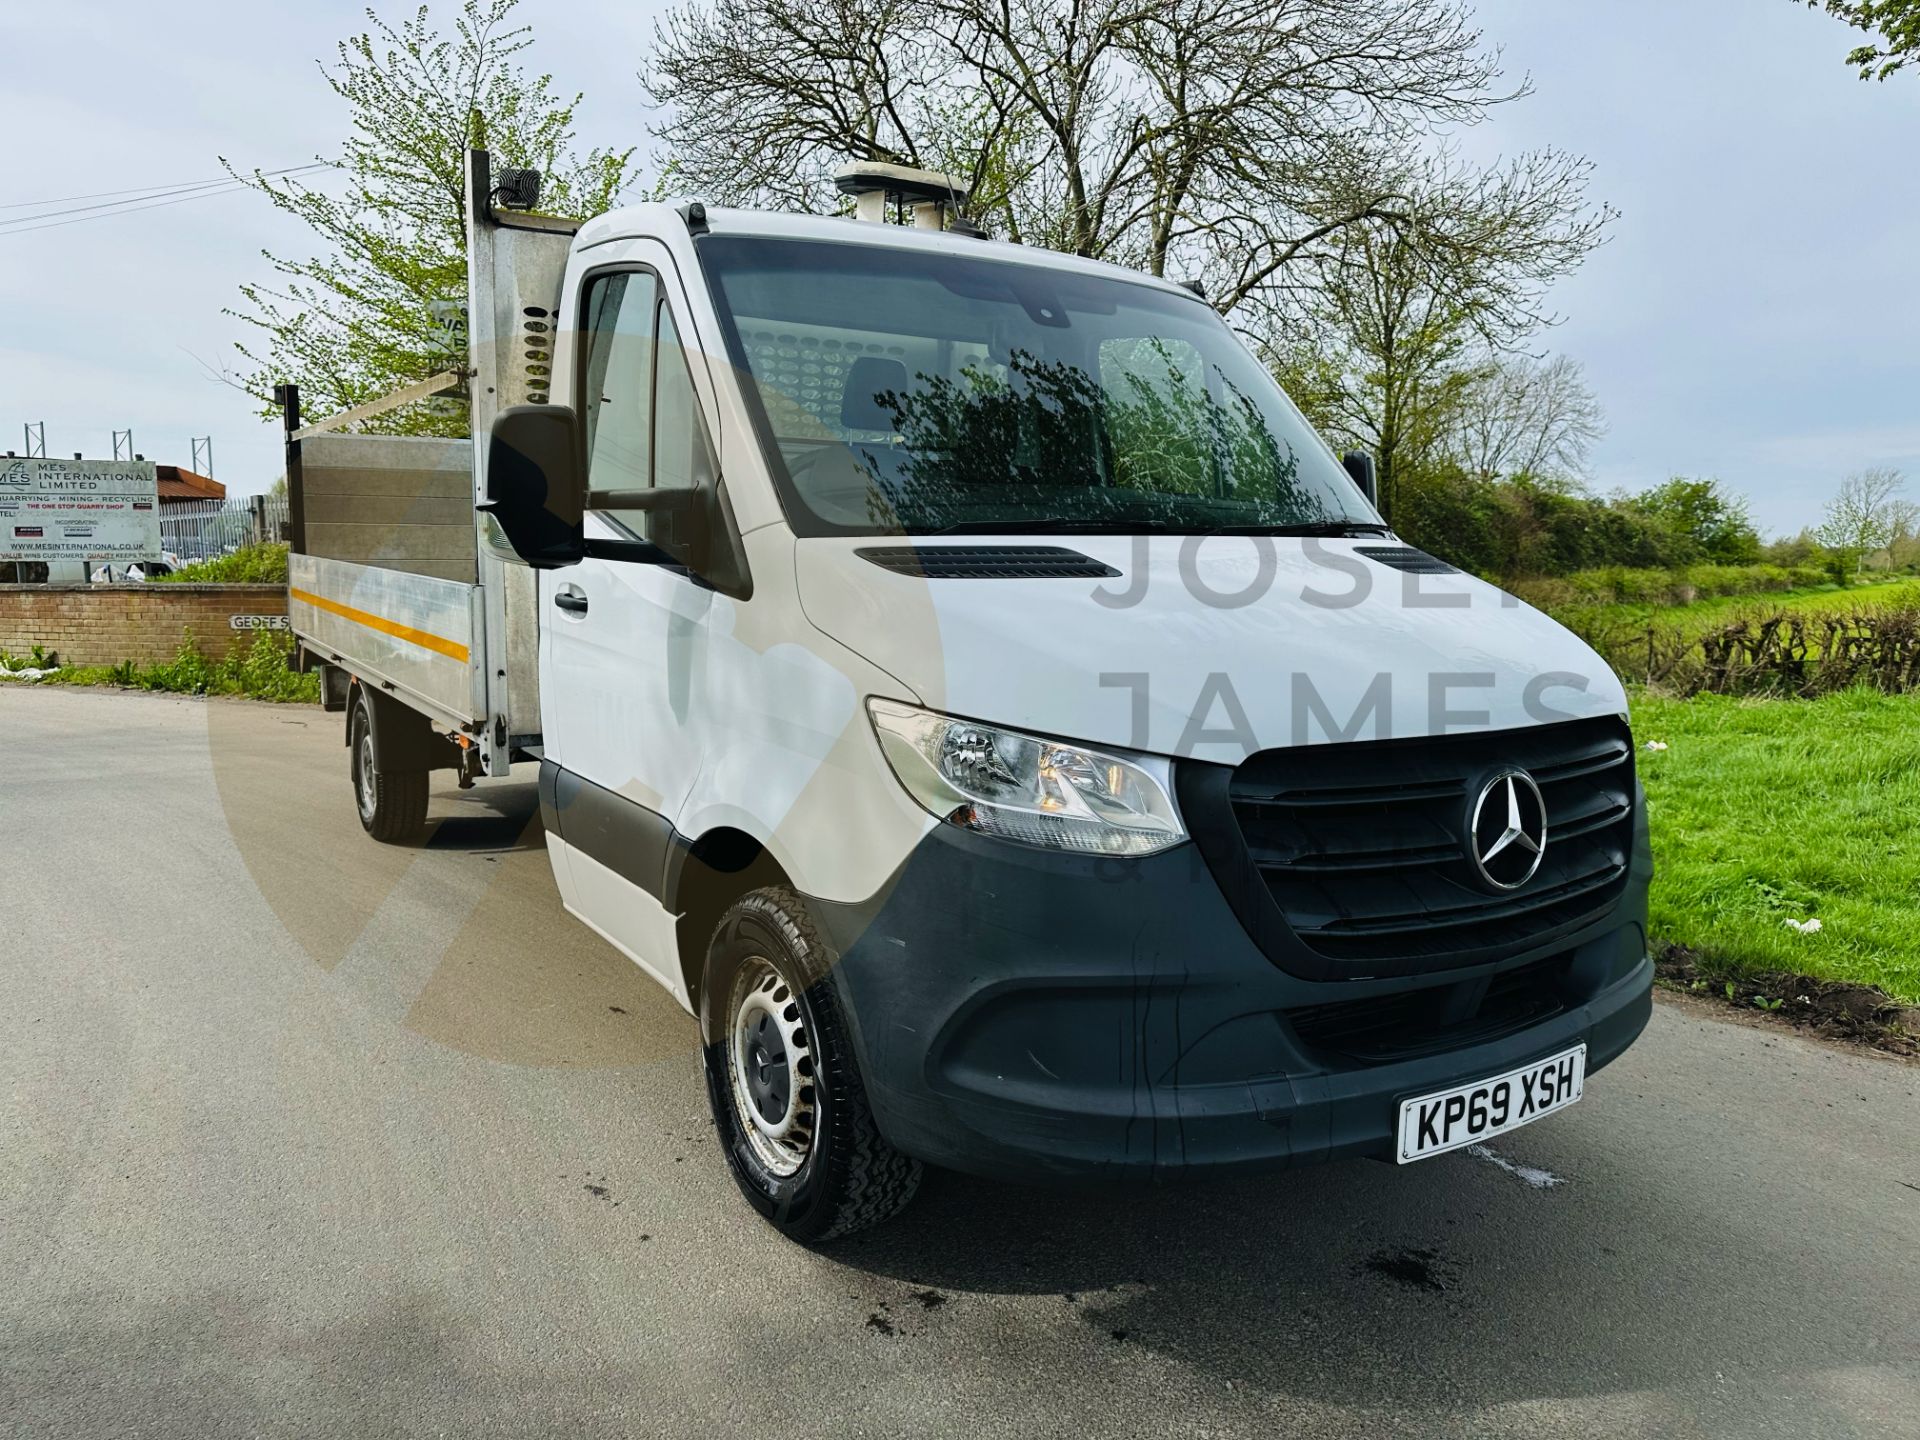 MERCEDES SPRINTER 316CDI LONG WHEEL BASE DROPSIDE WITH ELECTRIC TAIL LIFT -2020 MODEL- 1 OWNER - FSH - Image 2 of 30